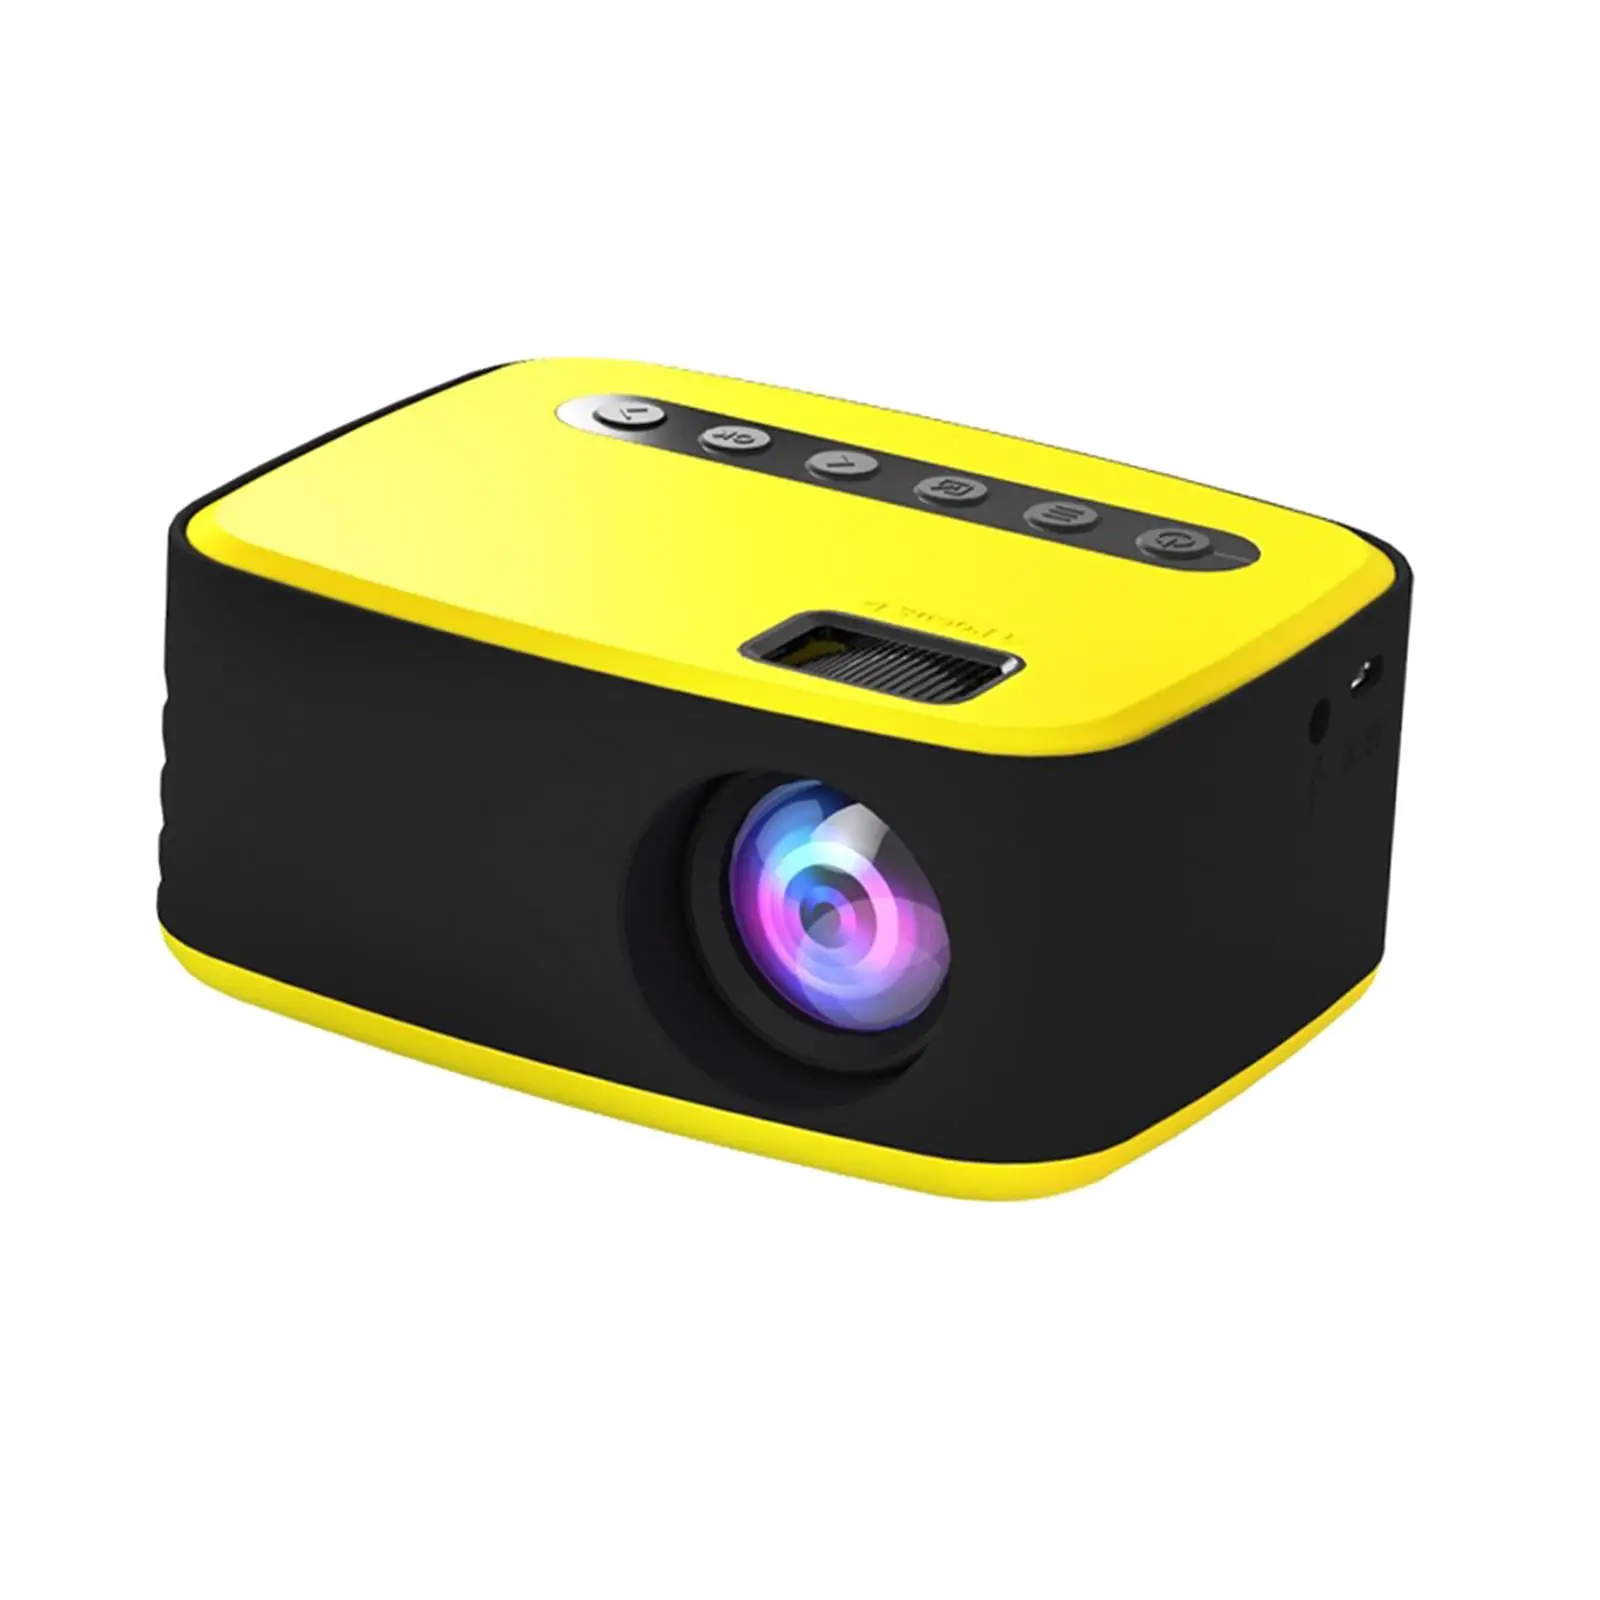 Projector USB 1080P Built in Speaker Smart Pocket Projector for Office Theater Watch Anywhere Inside Outside Bedroom Home Cinema